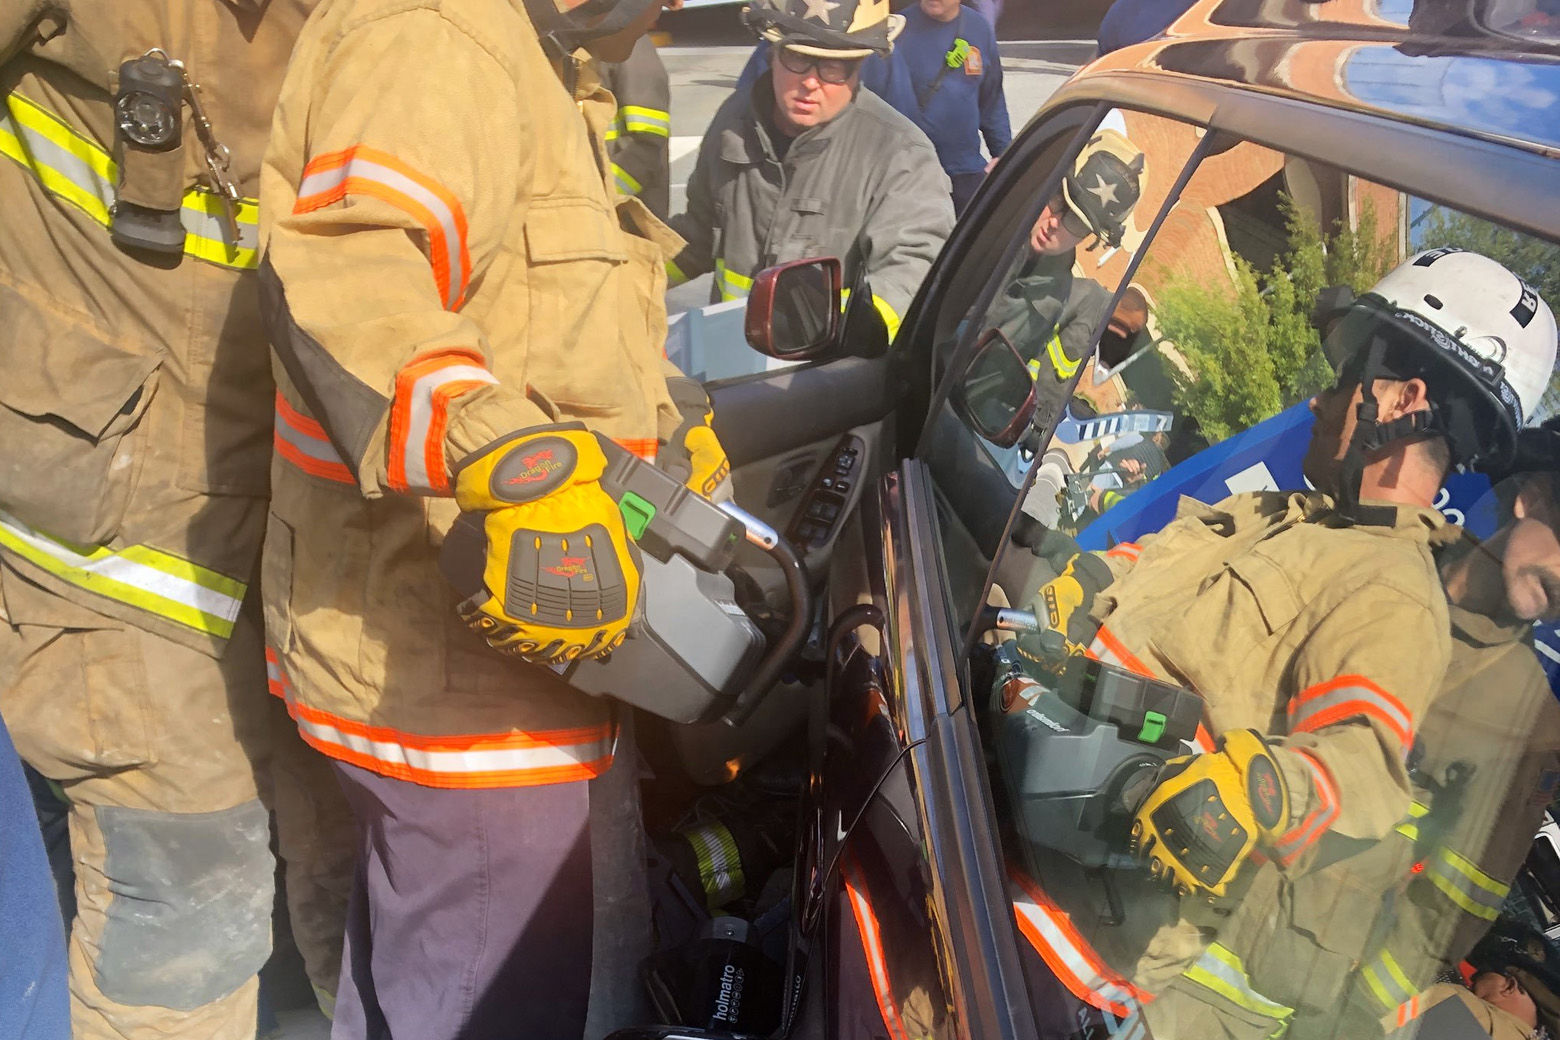 D.C. firefighters used several specialized rescue tools to free the woman's trapped leg.